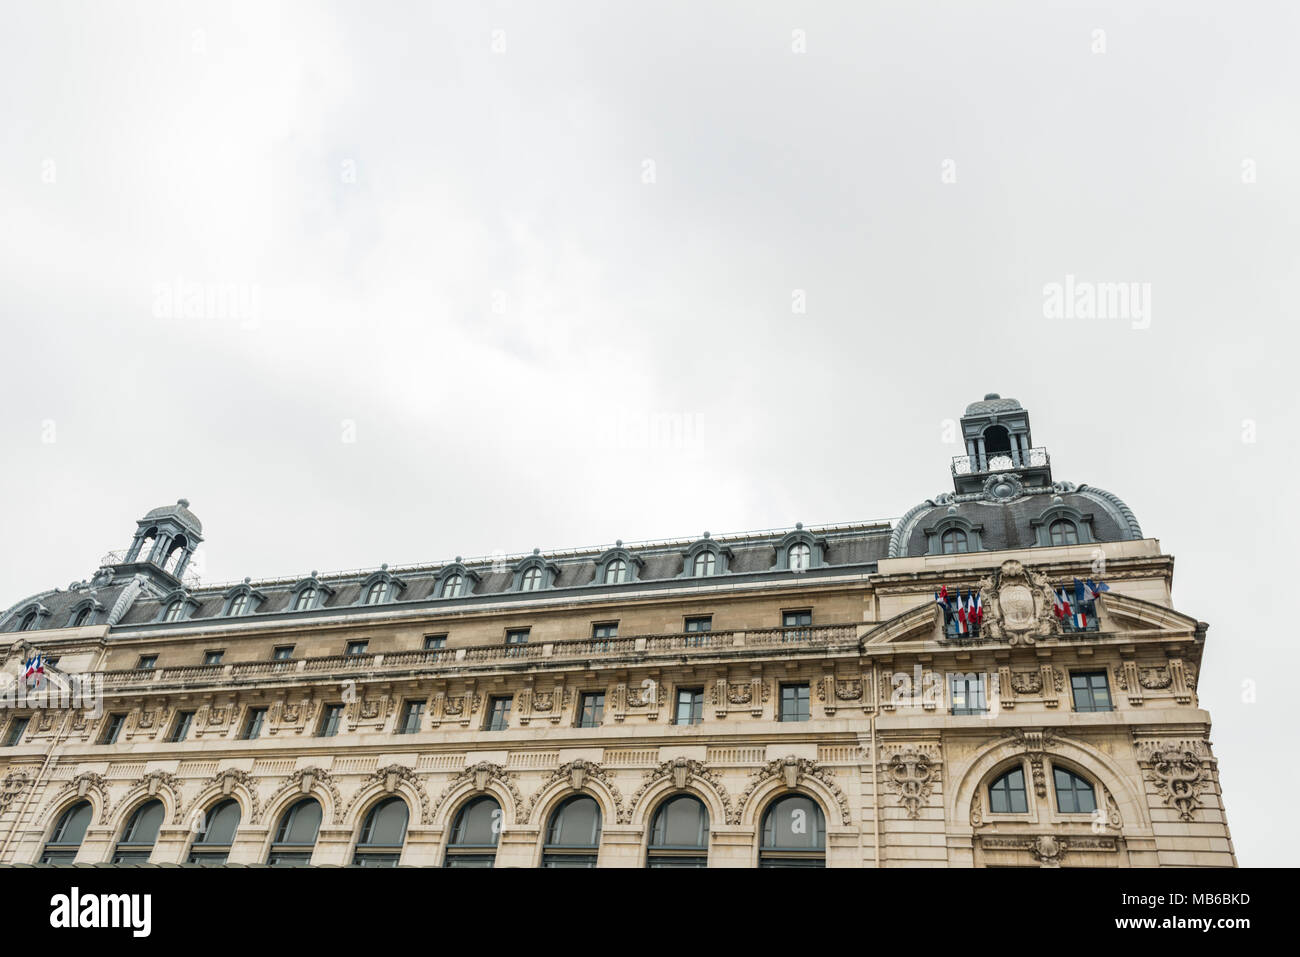 A low angle shot of the Musée dOrsay, which is housed on the Gare d'Orsay, an erstwhile railway station built in the Beaux-Arts style. Stock Photo